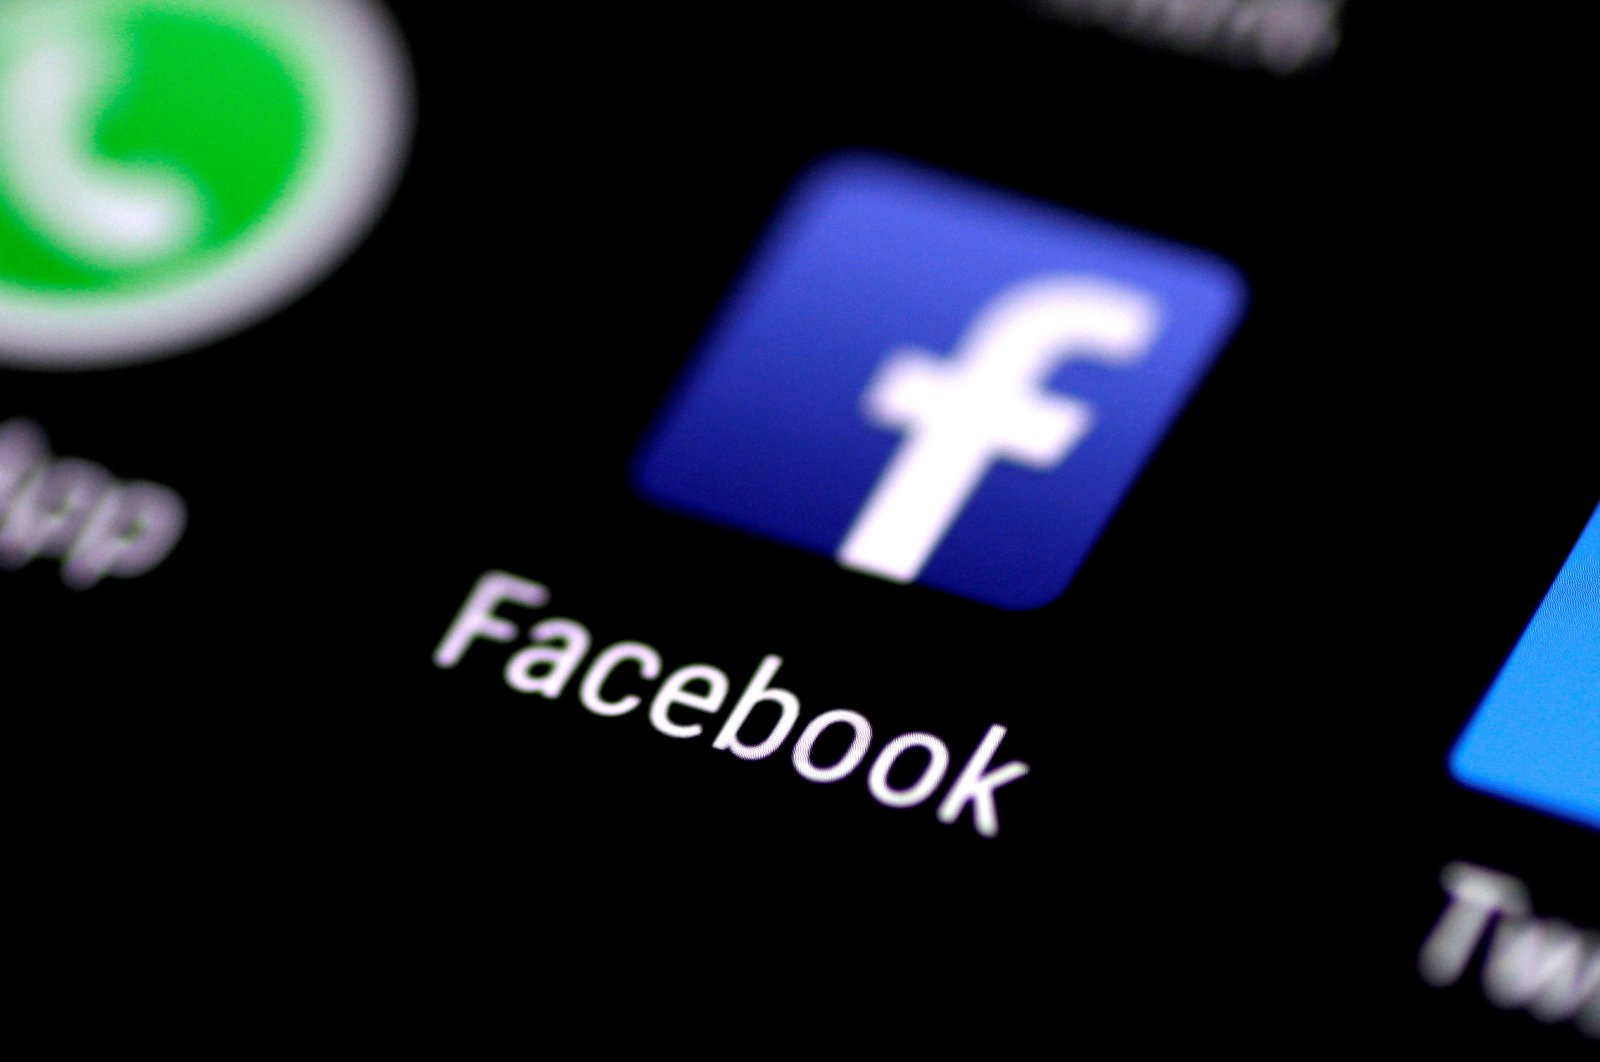 The Facebook app is seen on a phone screen on Aug. 3, 2017. (Reuters Photo)